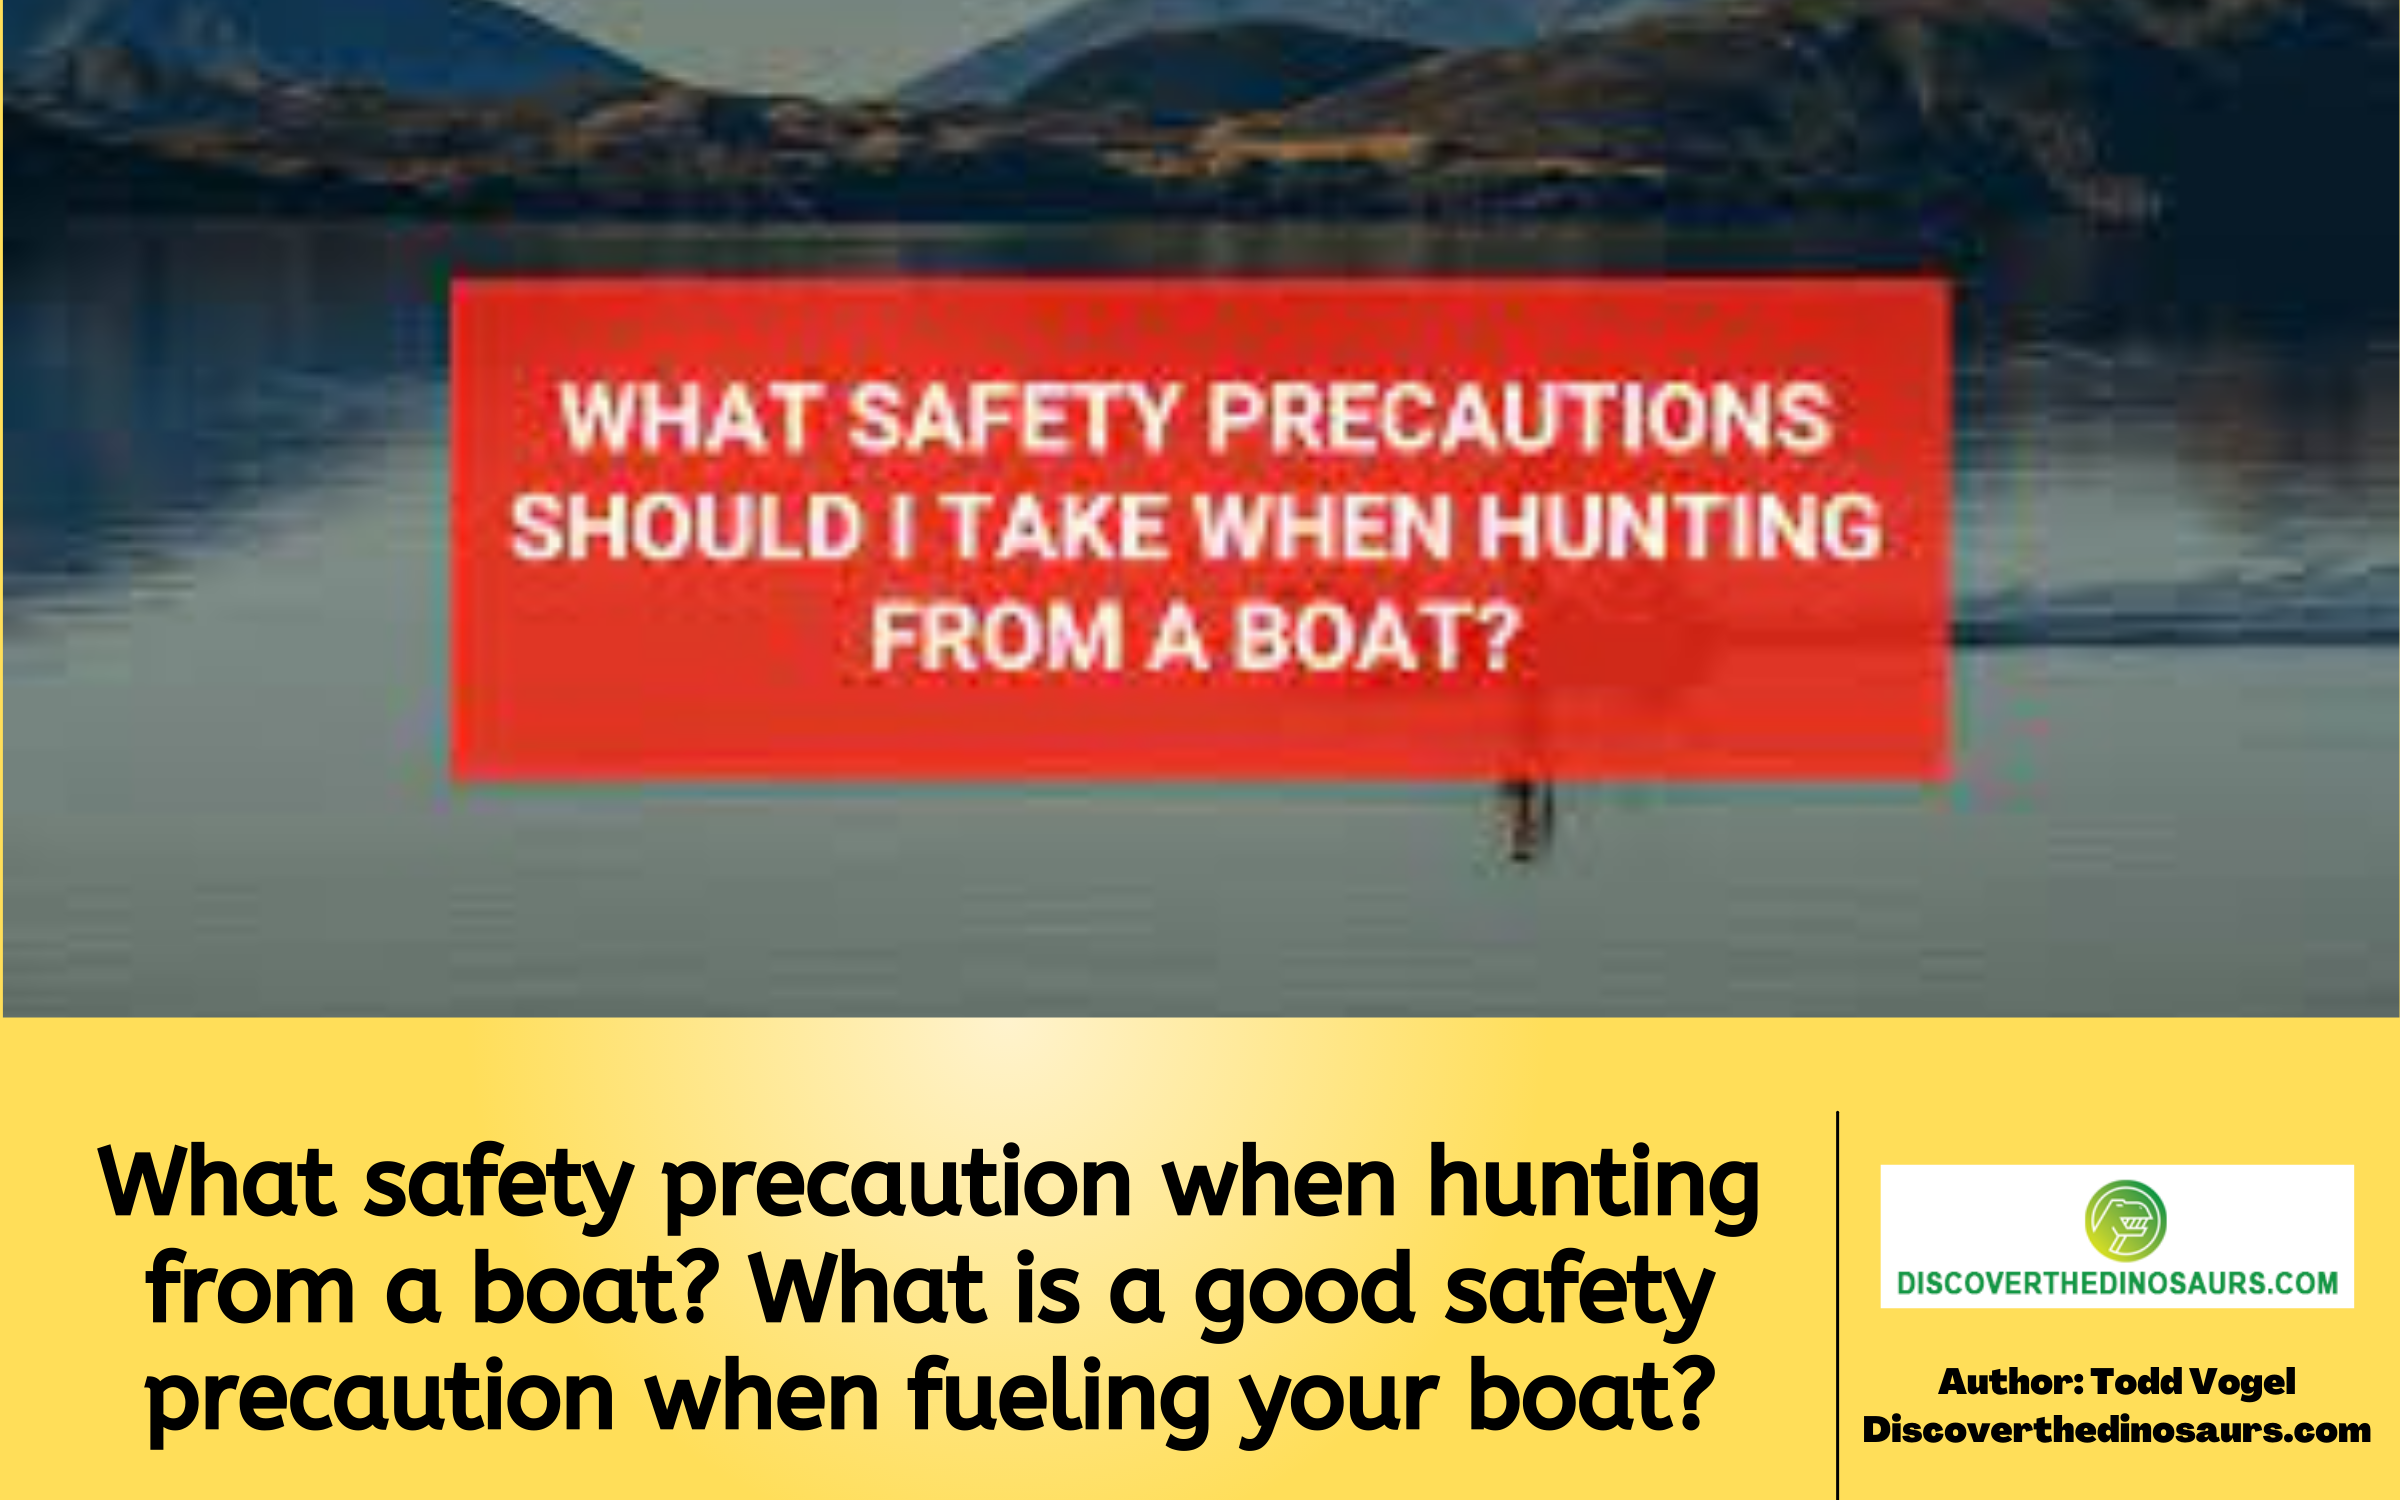 What safety precaution when hunting from a boat? What is a good safety precaution when fueling your boat?